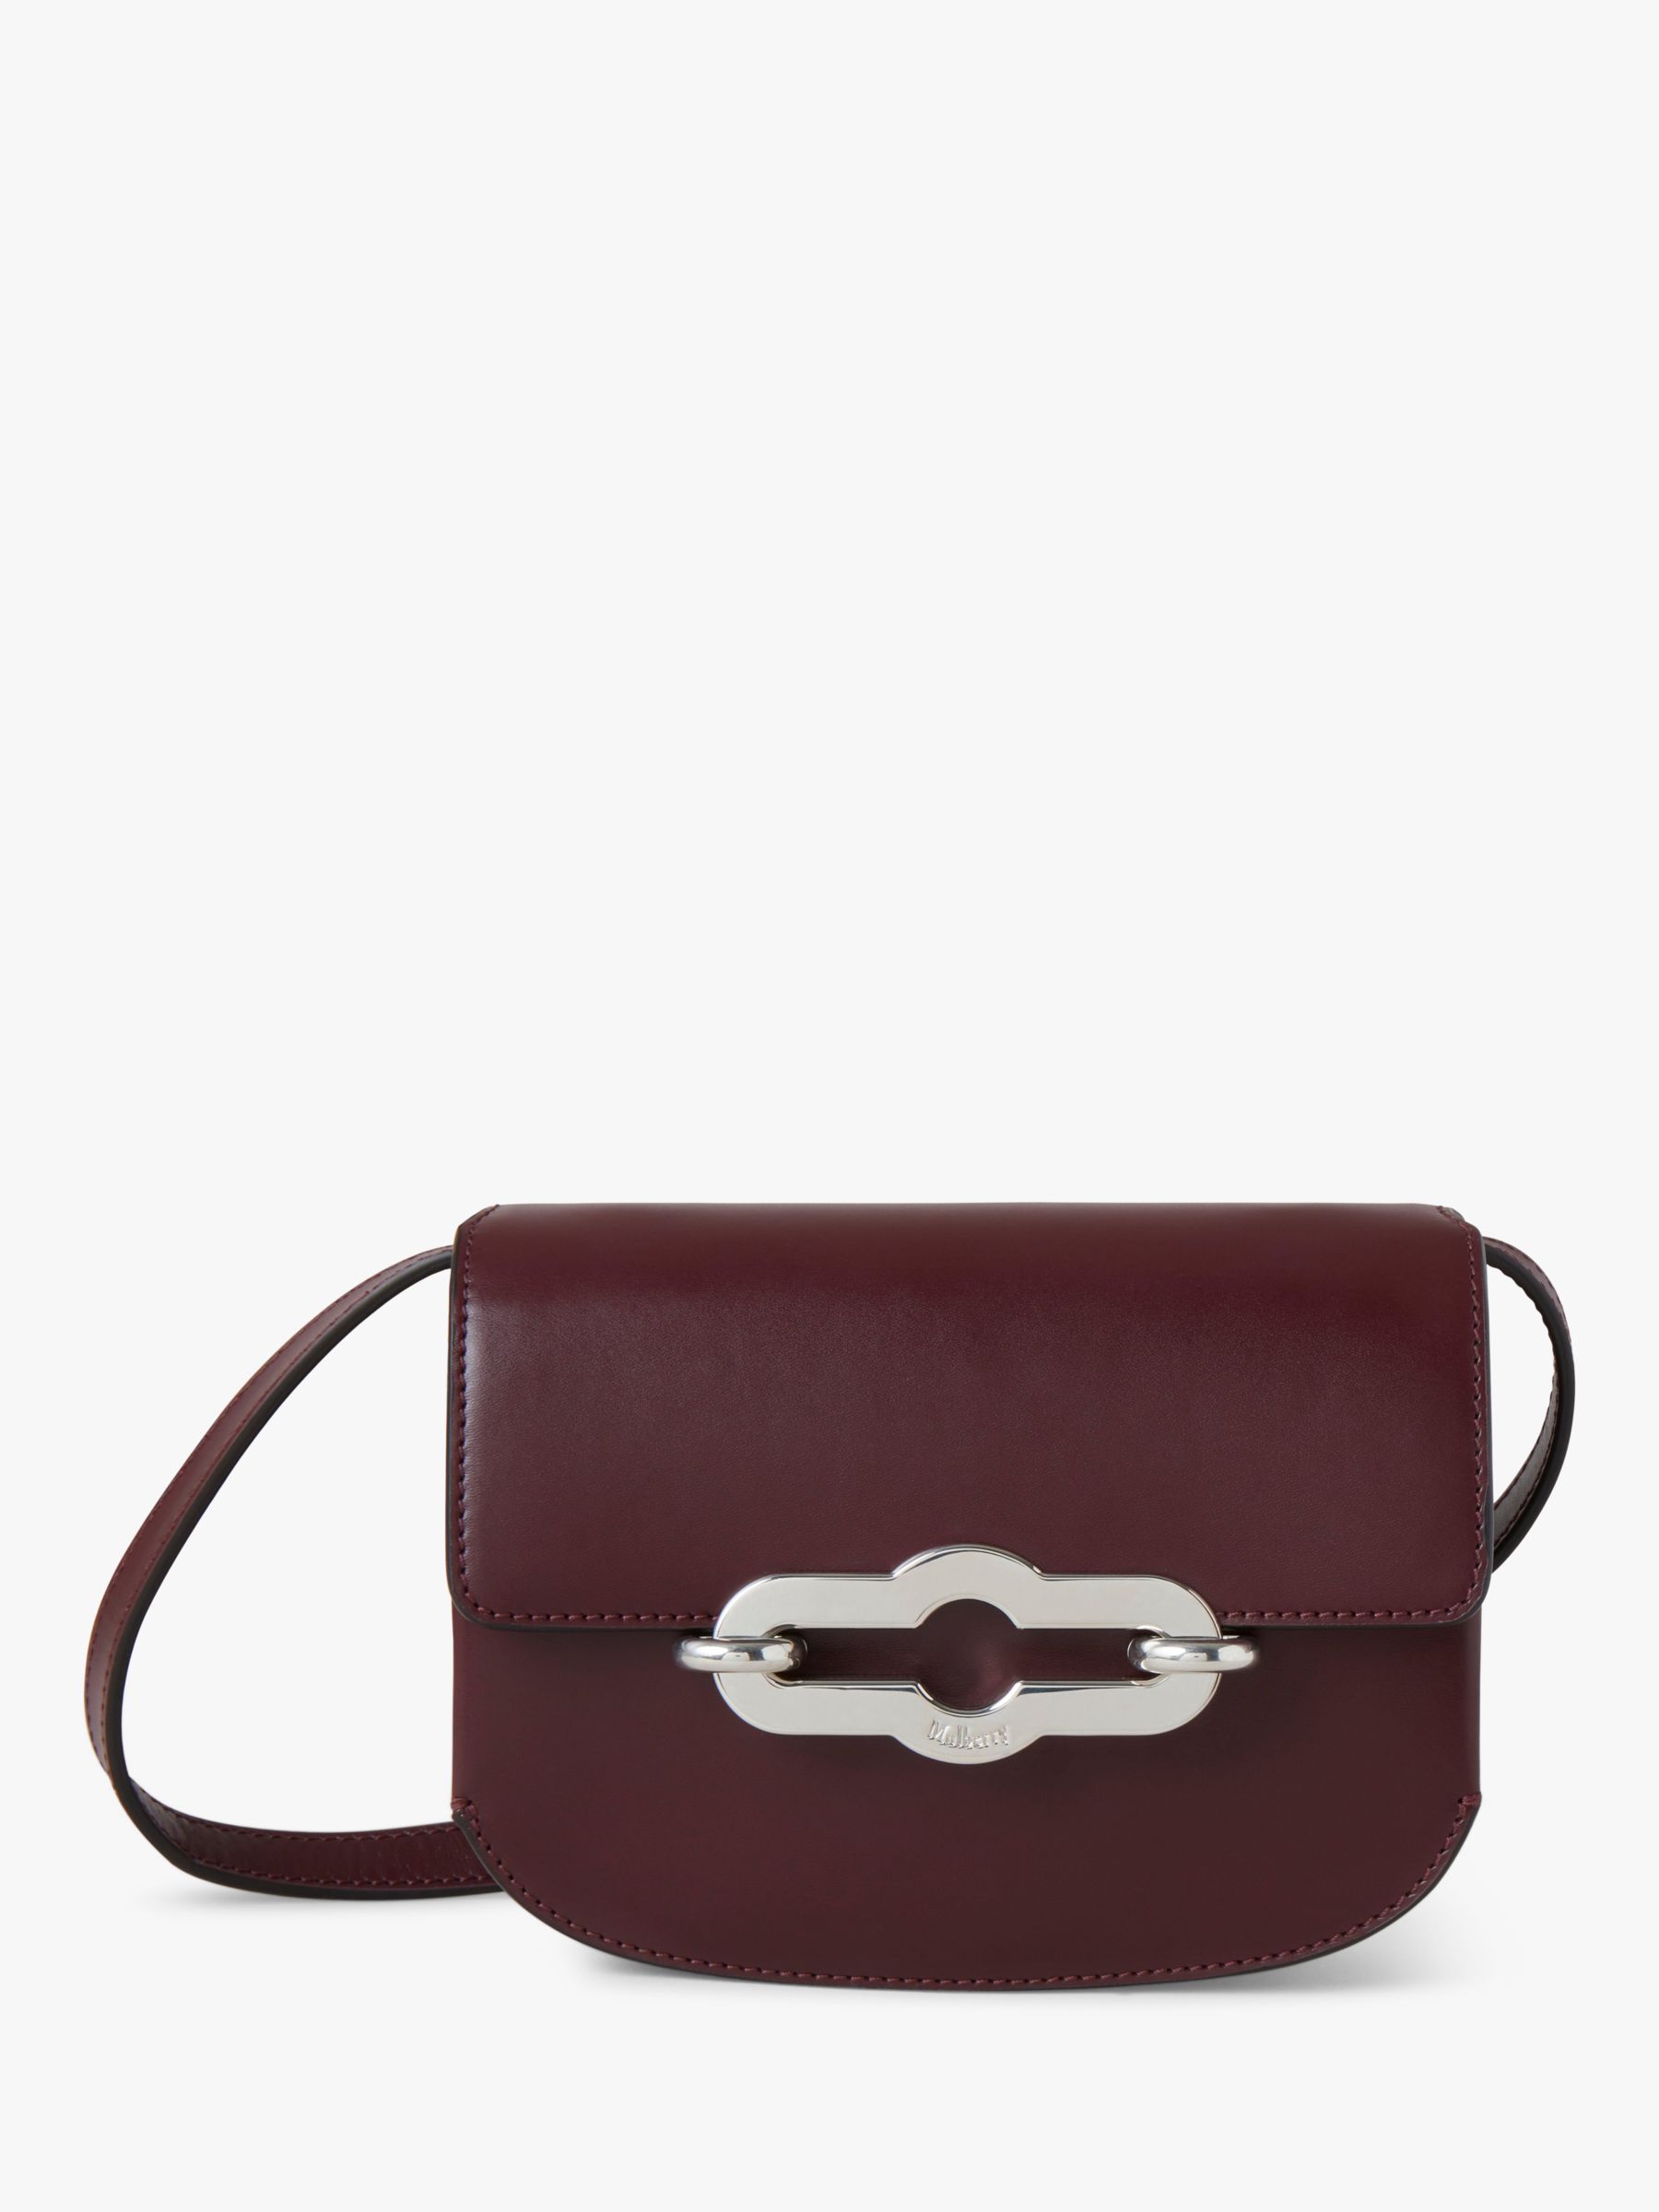 Mulberry Small Pimlico Satchel, Black Cherry at John Lewis & Partners